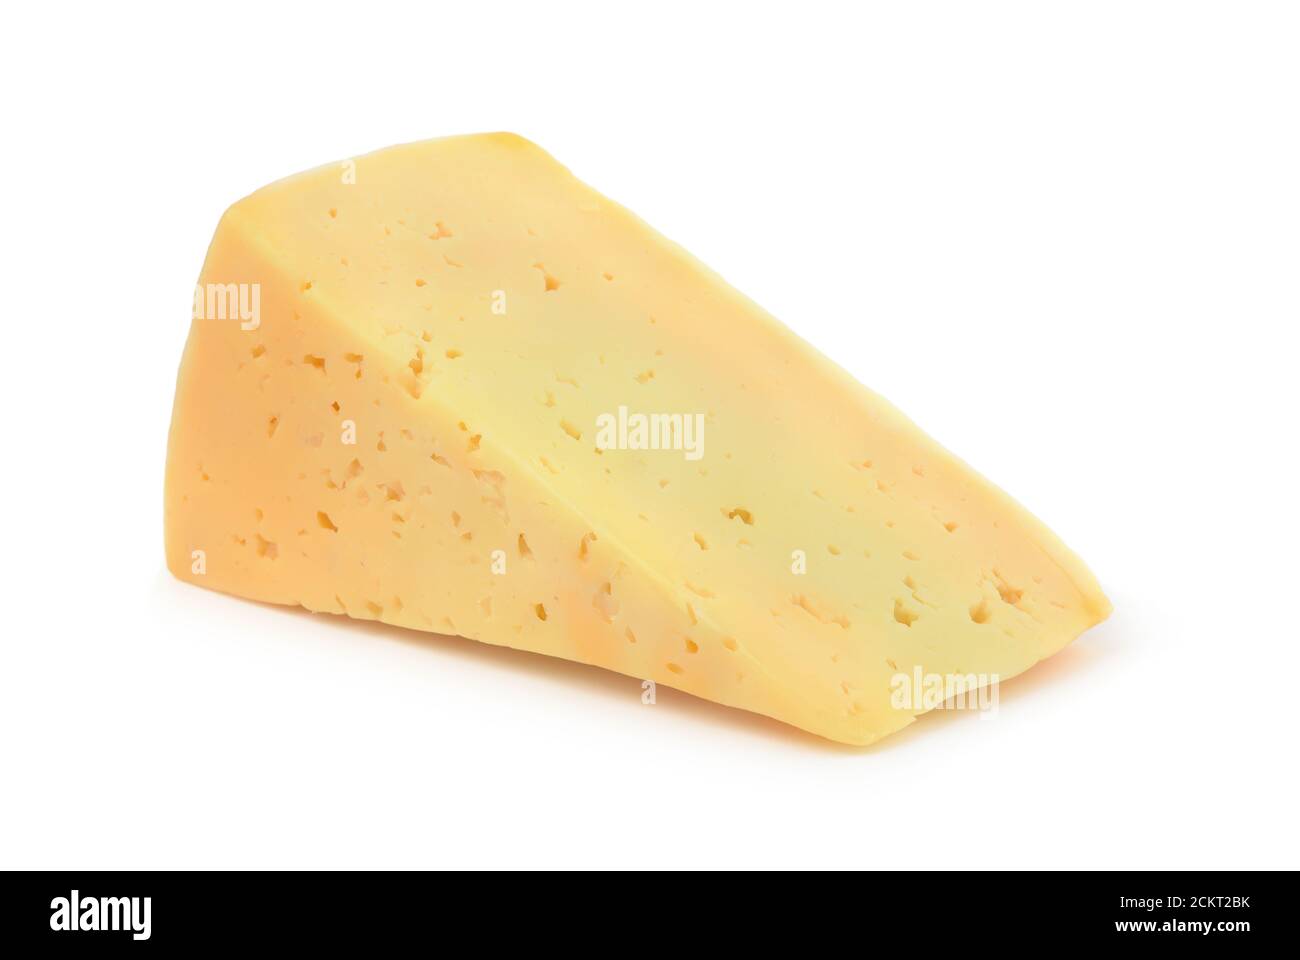 Piece of semi hard cheese isolated on white Stock Photo